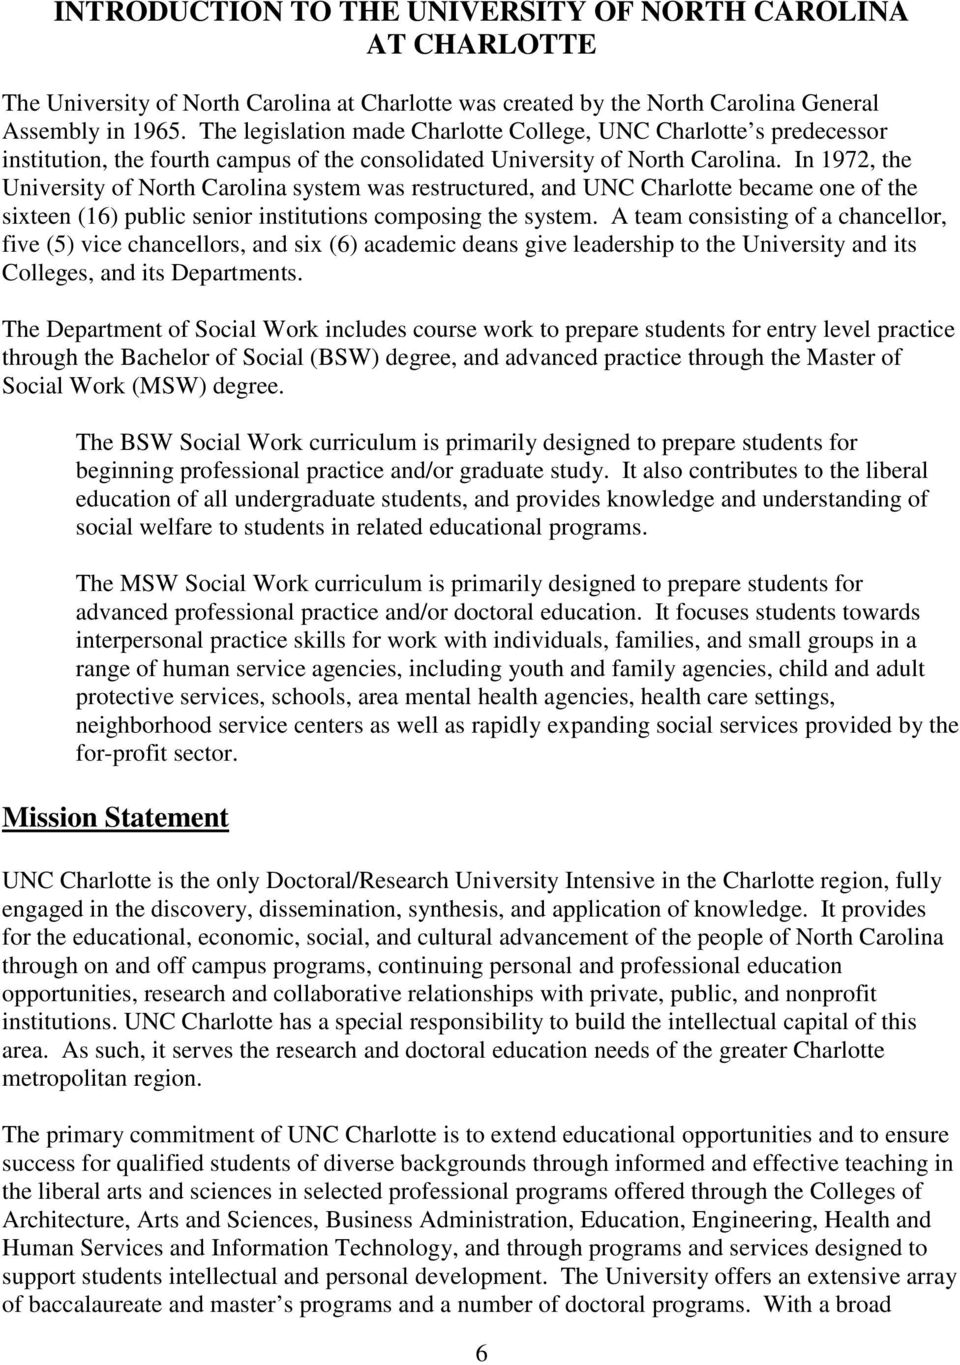 In 1972, the University of North Carolina system was restructured, and UNC Charlotte became one of the sixteen (16) public senior institutions composing the system.